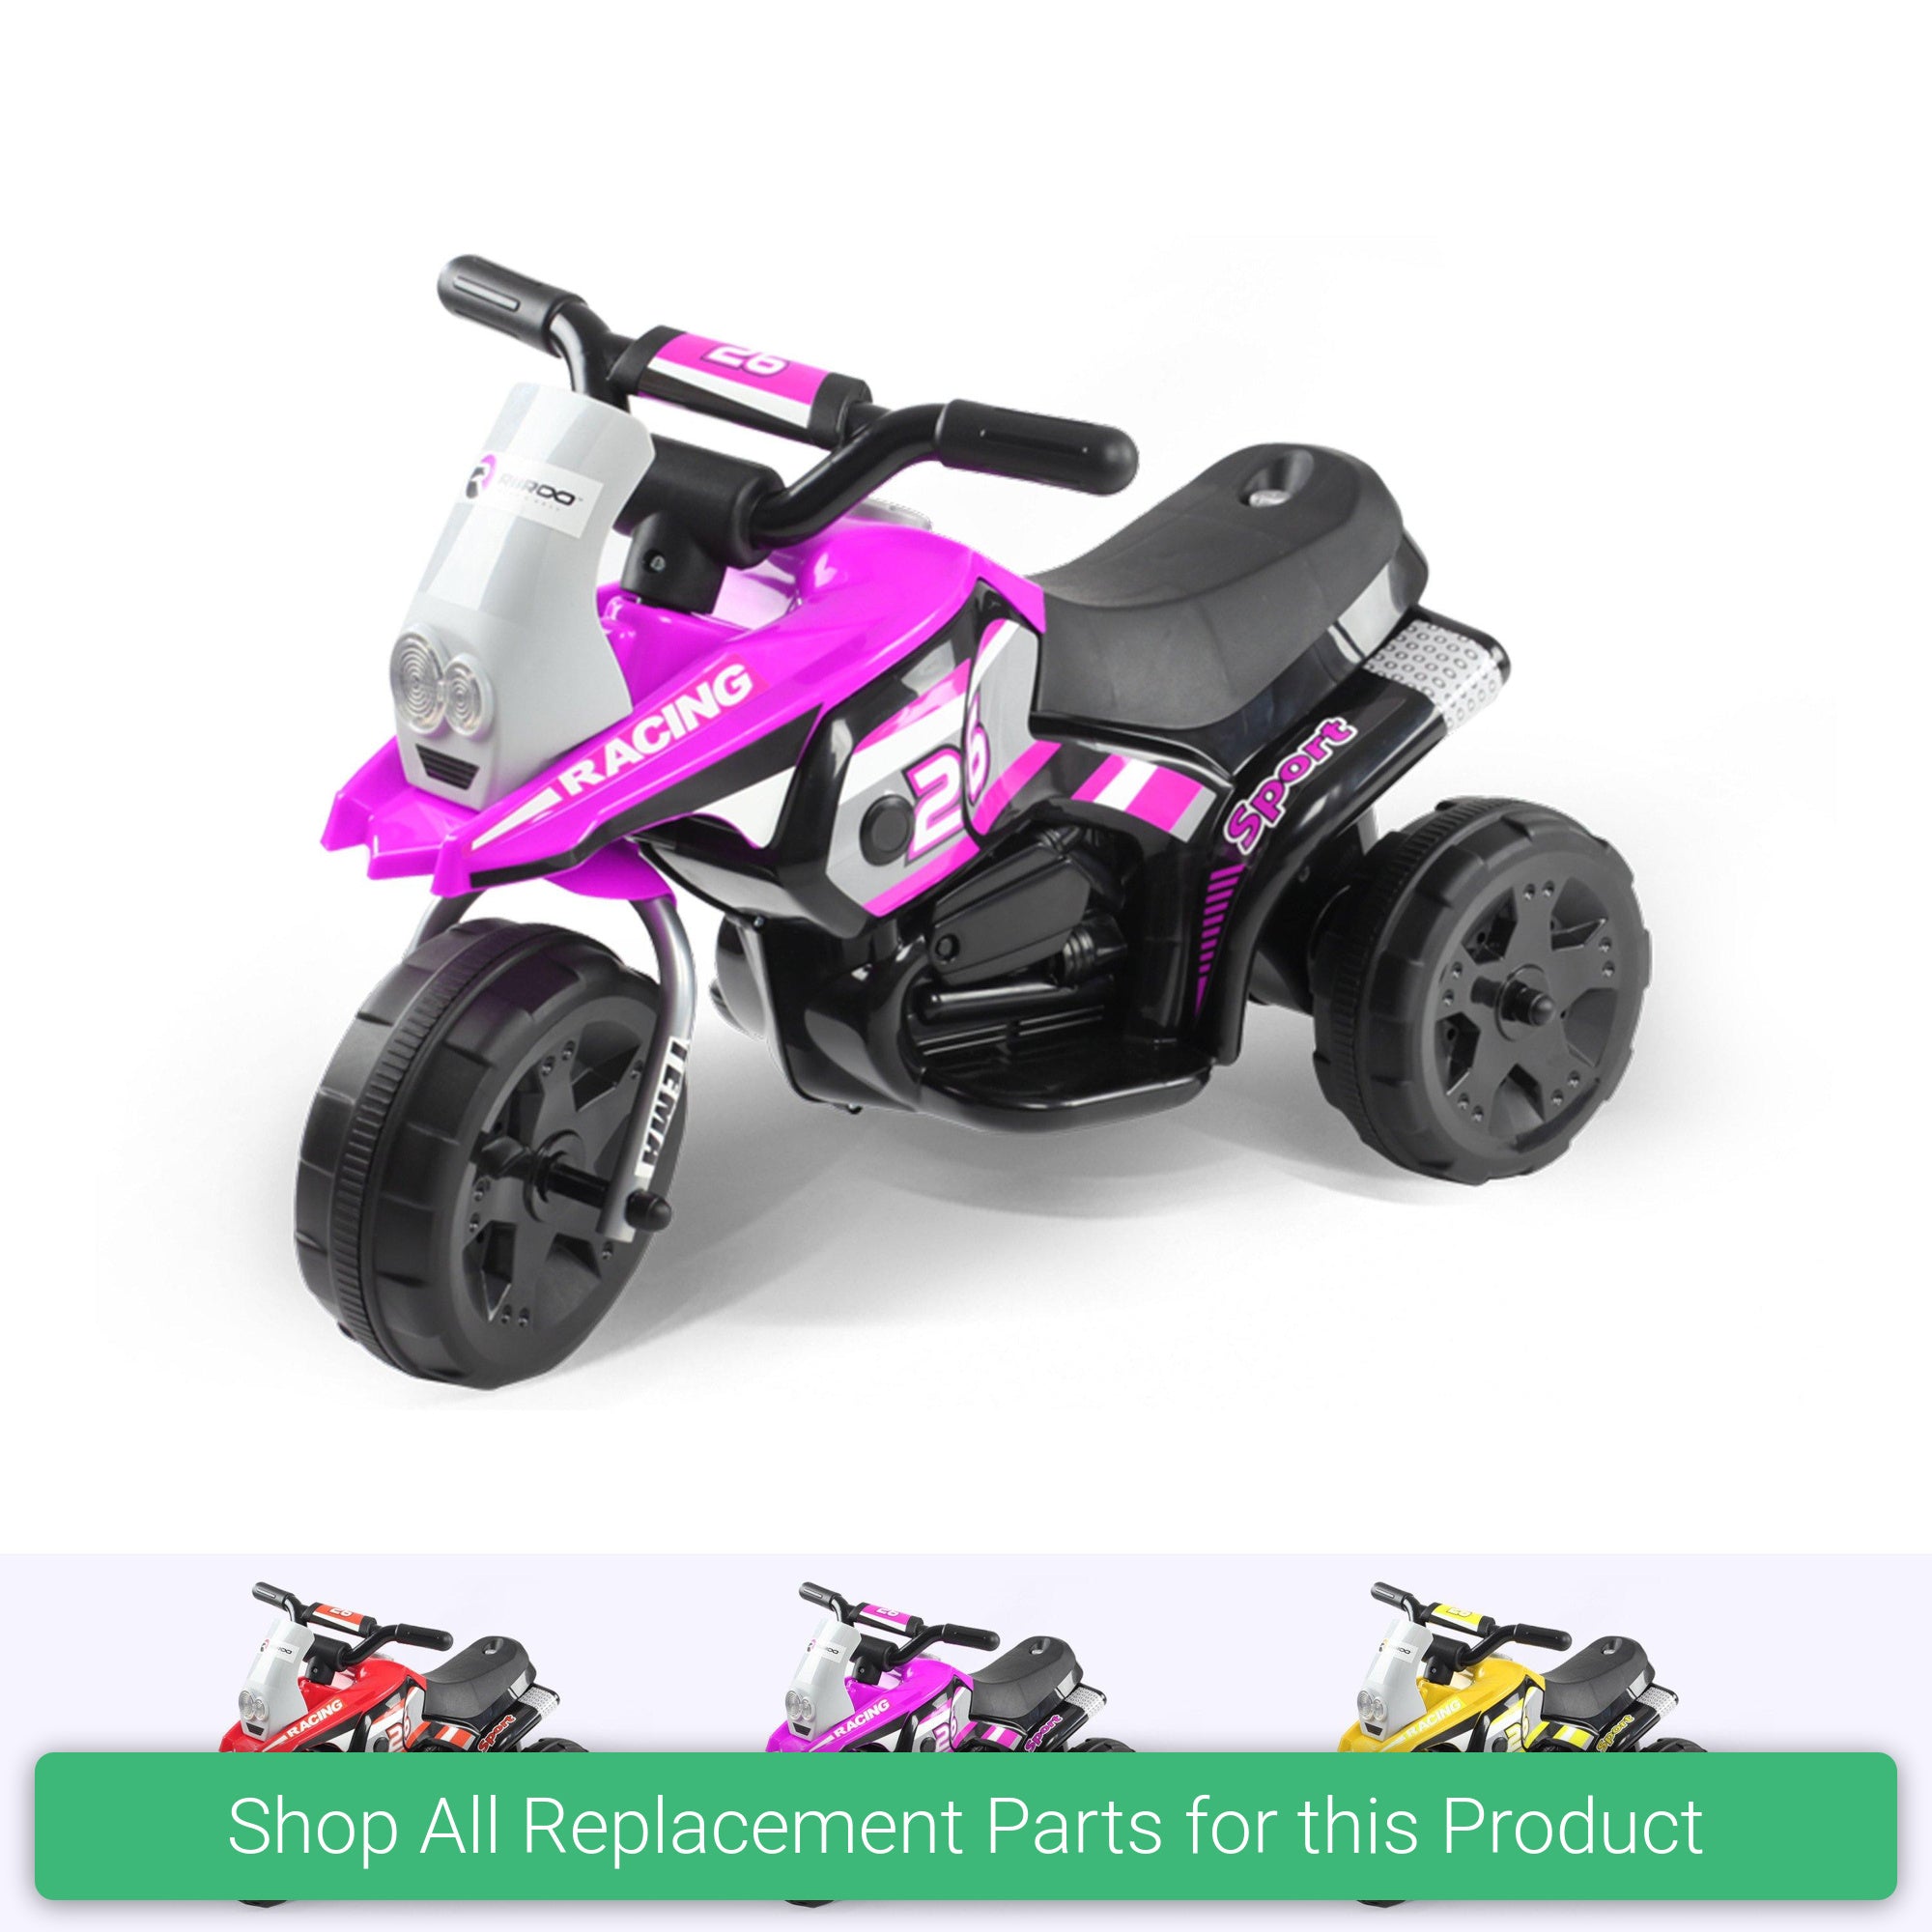 Replacement Parts and Spares for Kids Police Bike - PBIK-2016S2 - HV318